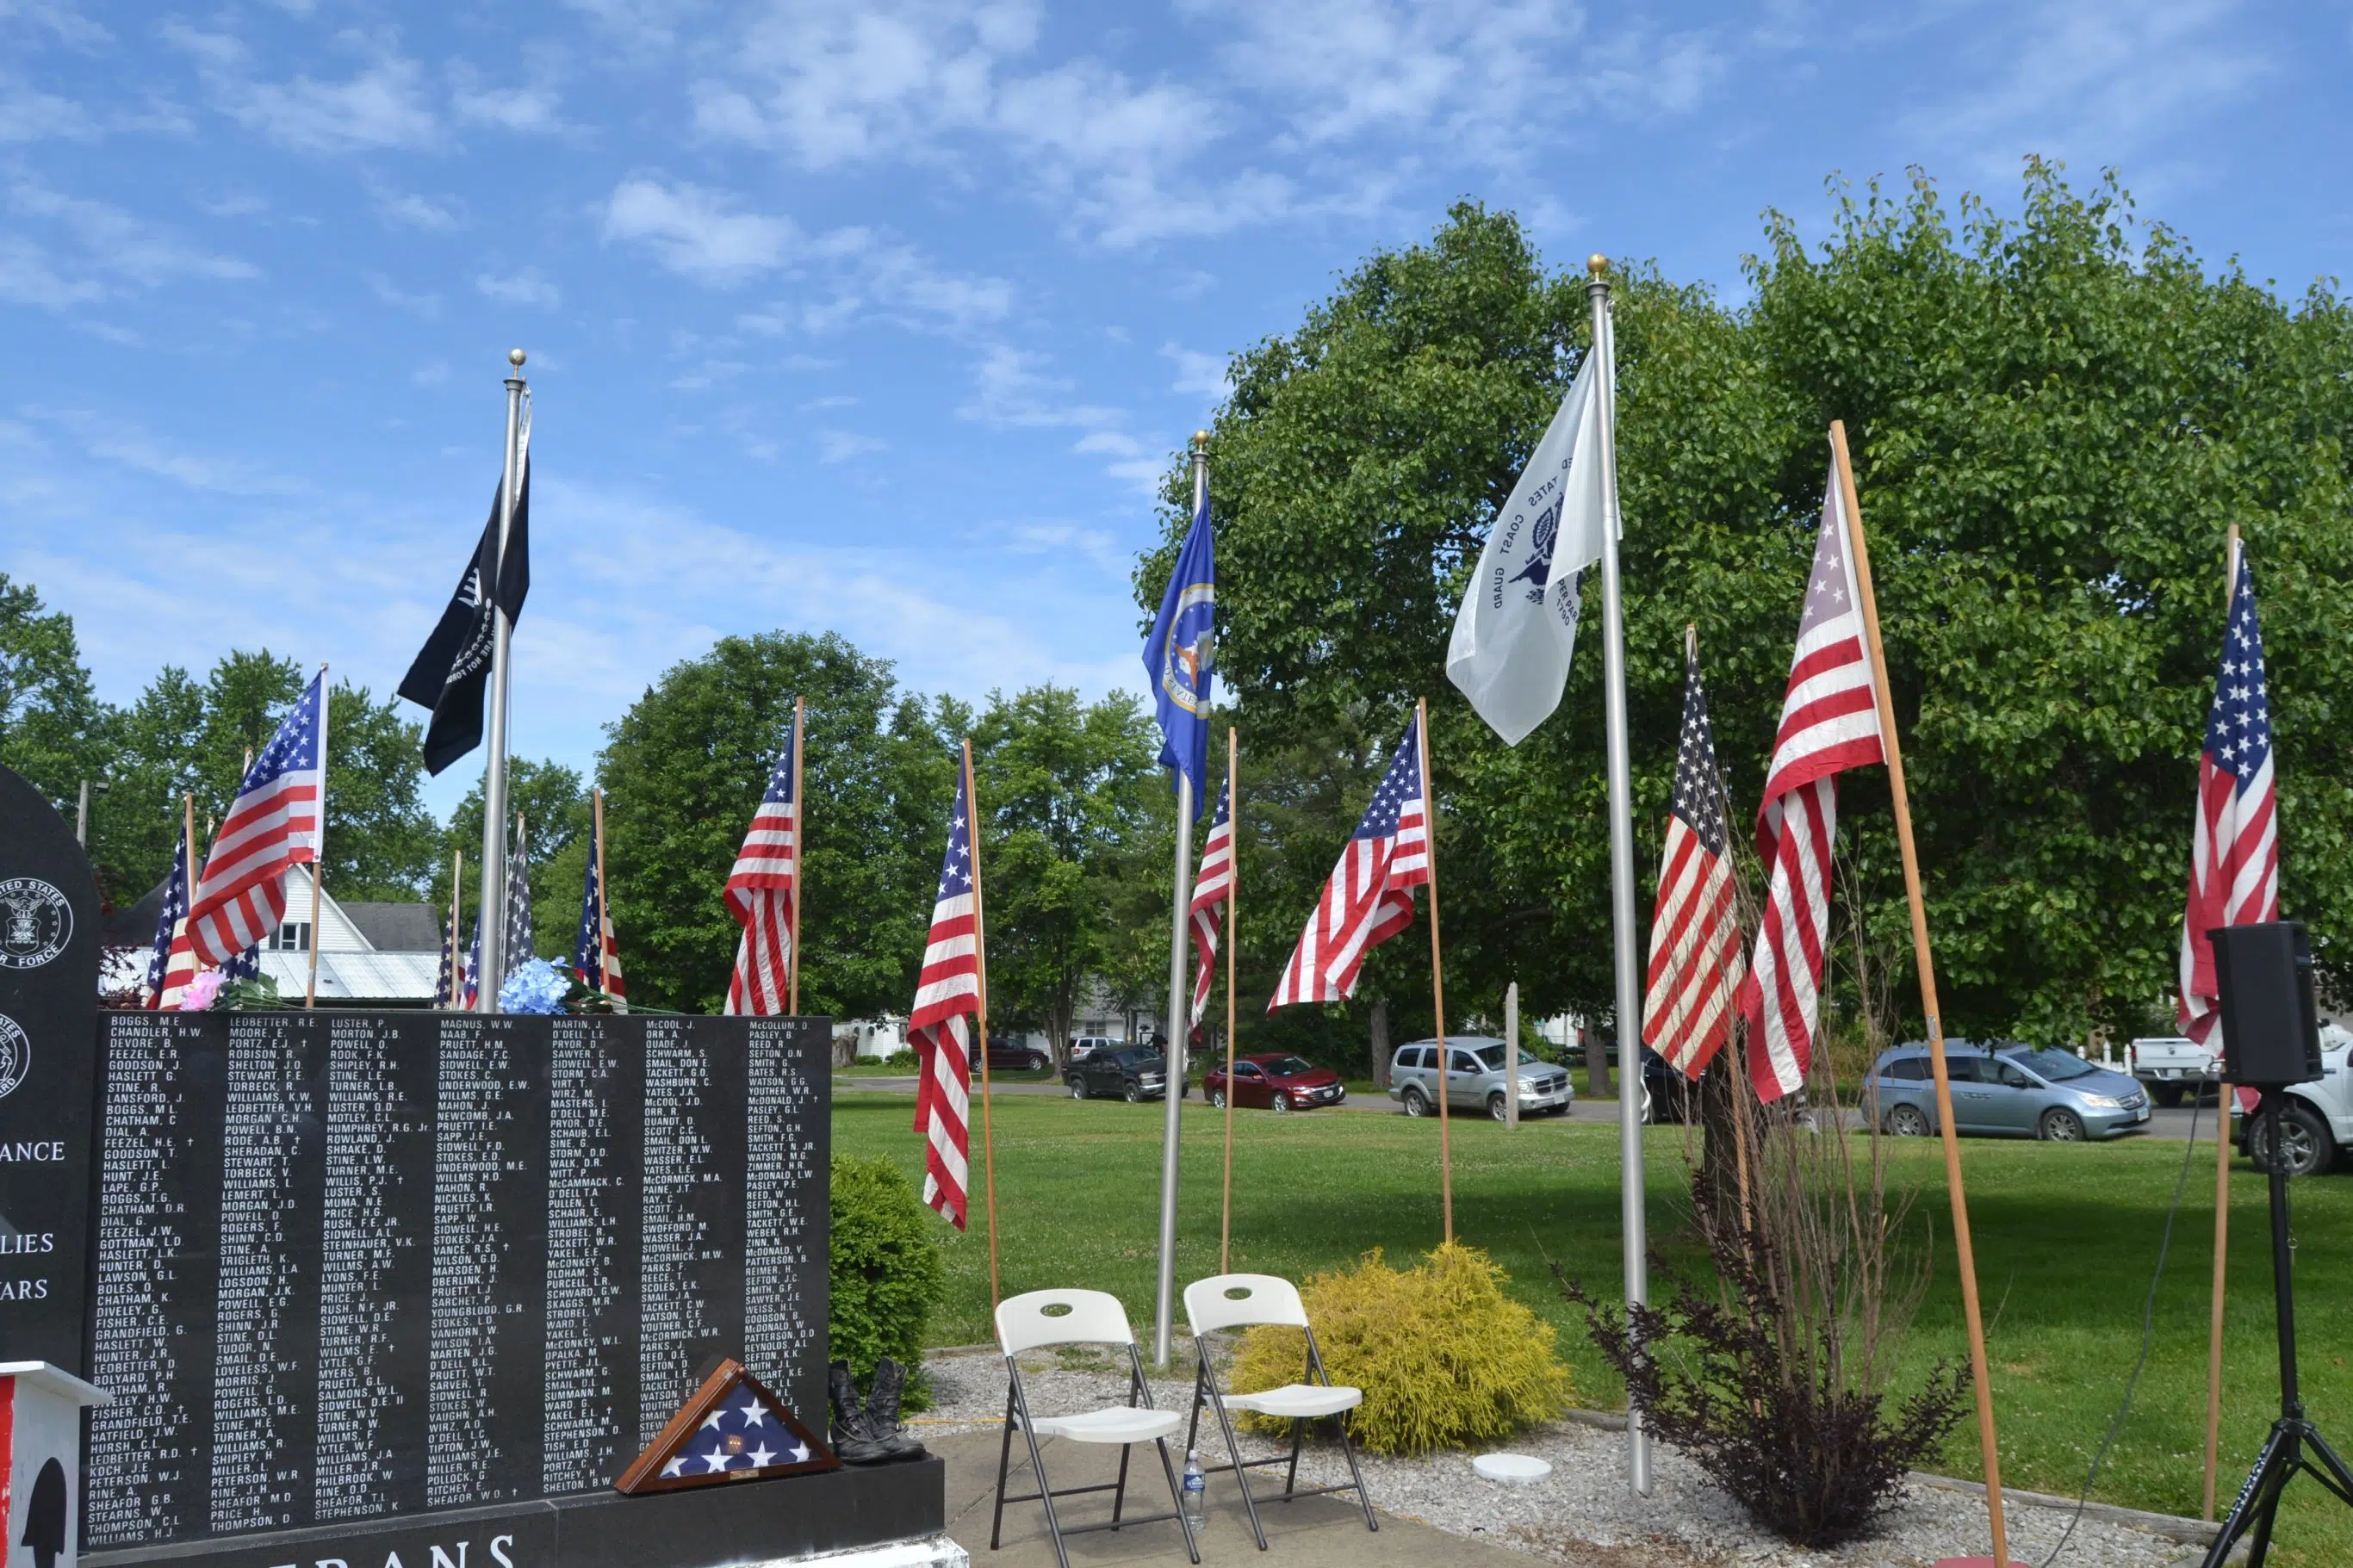 Photos from the Brownstown Memorial Day Service